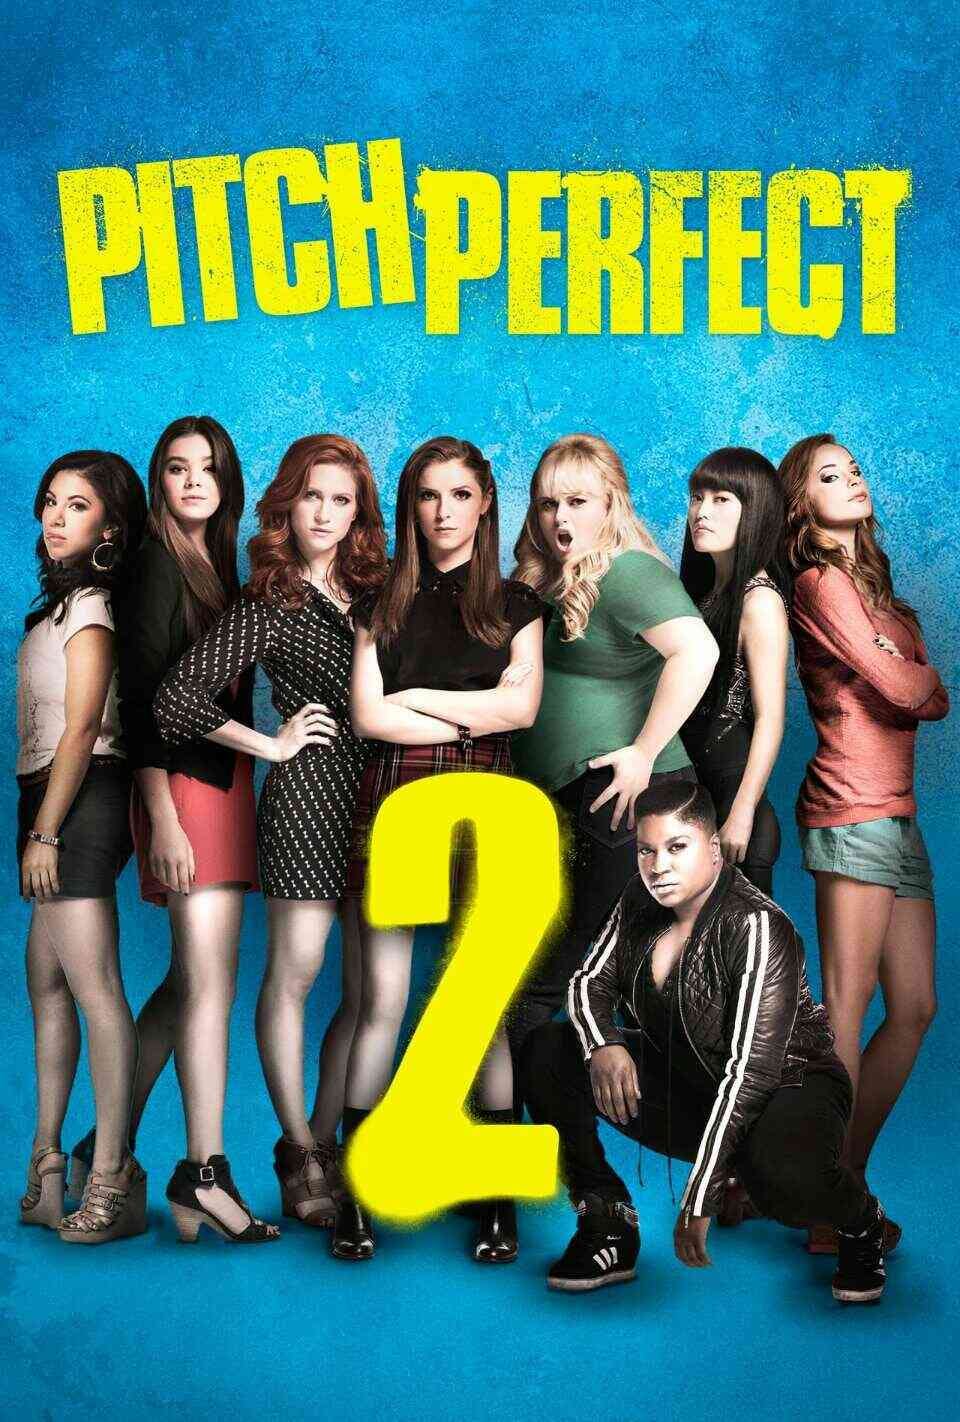 Read Pitch Perfect 2 screenplay (poster)